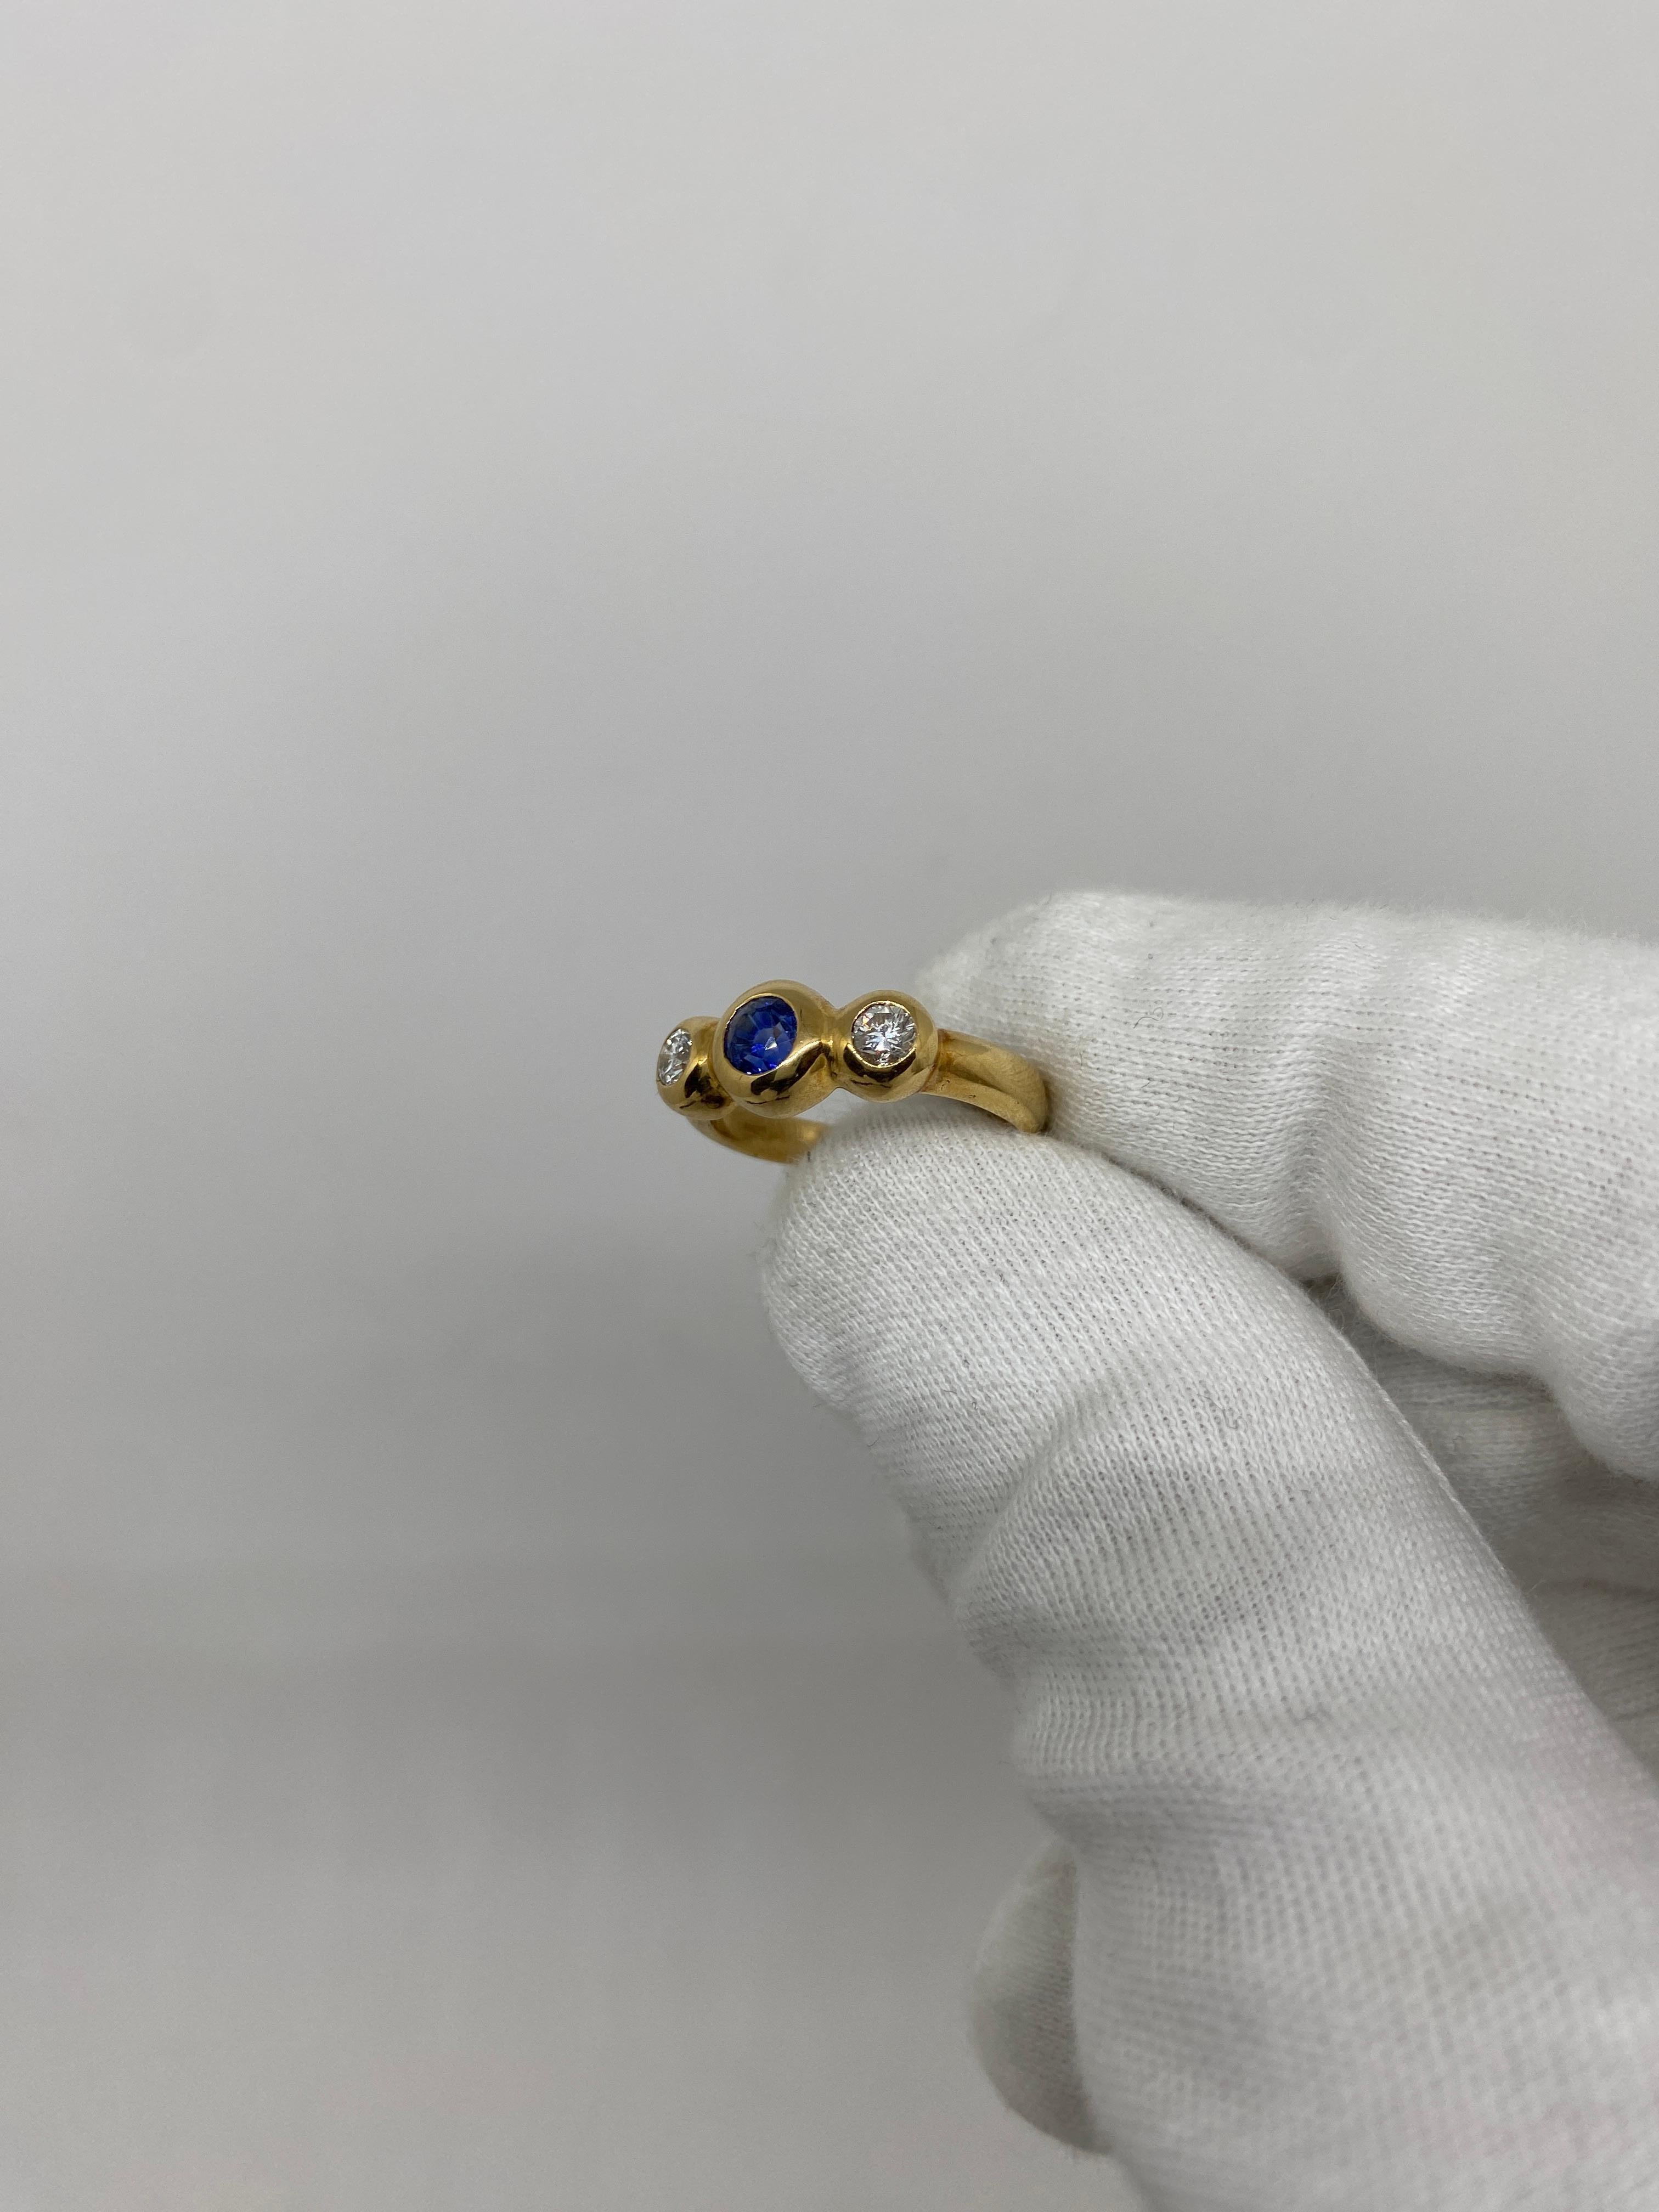 Ring made of 18kt yellow gold with brilliant-cut sapphire and two natural white brilliant-cut diamonds

Welcome to our jewelry collection, where every piece tells a story of timeless elegance and unparalleled craftsmanship. As a family-run business